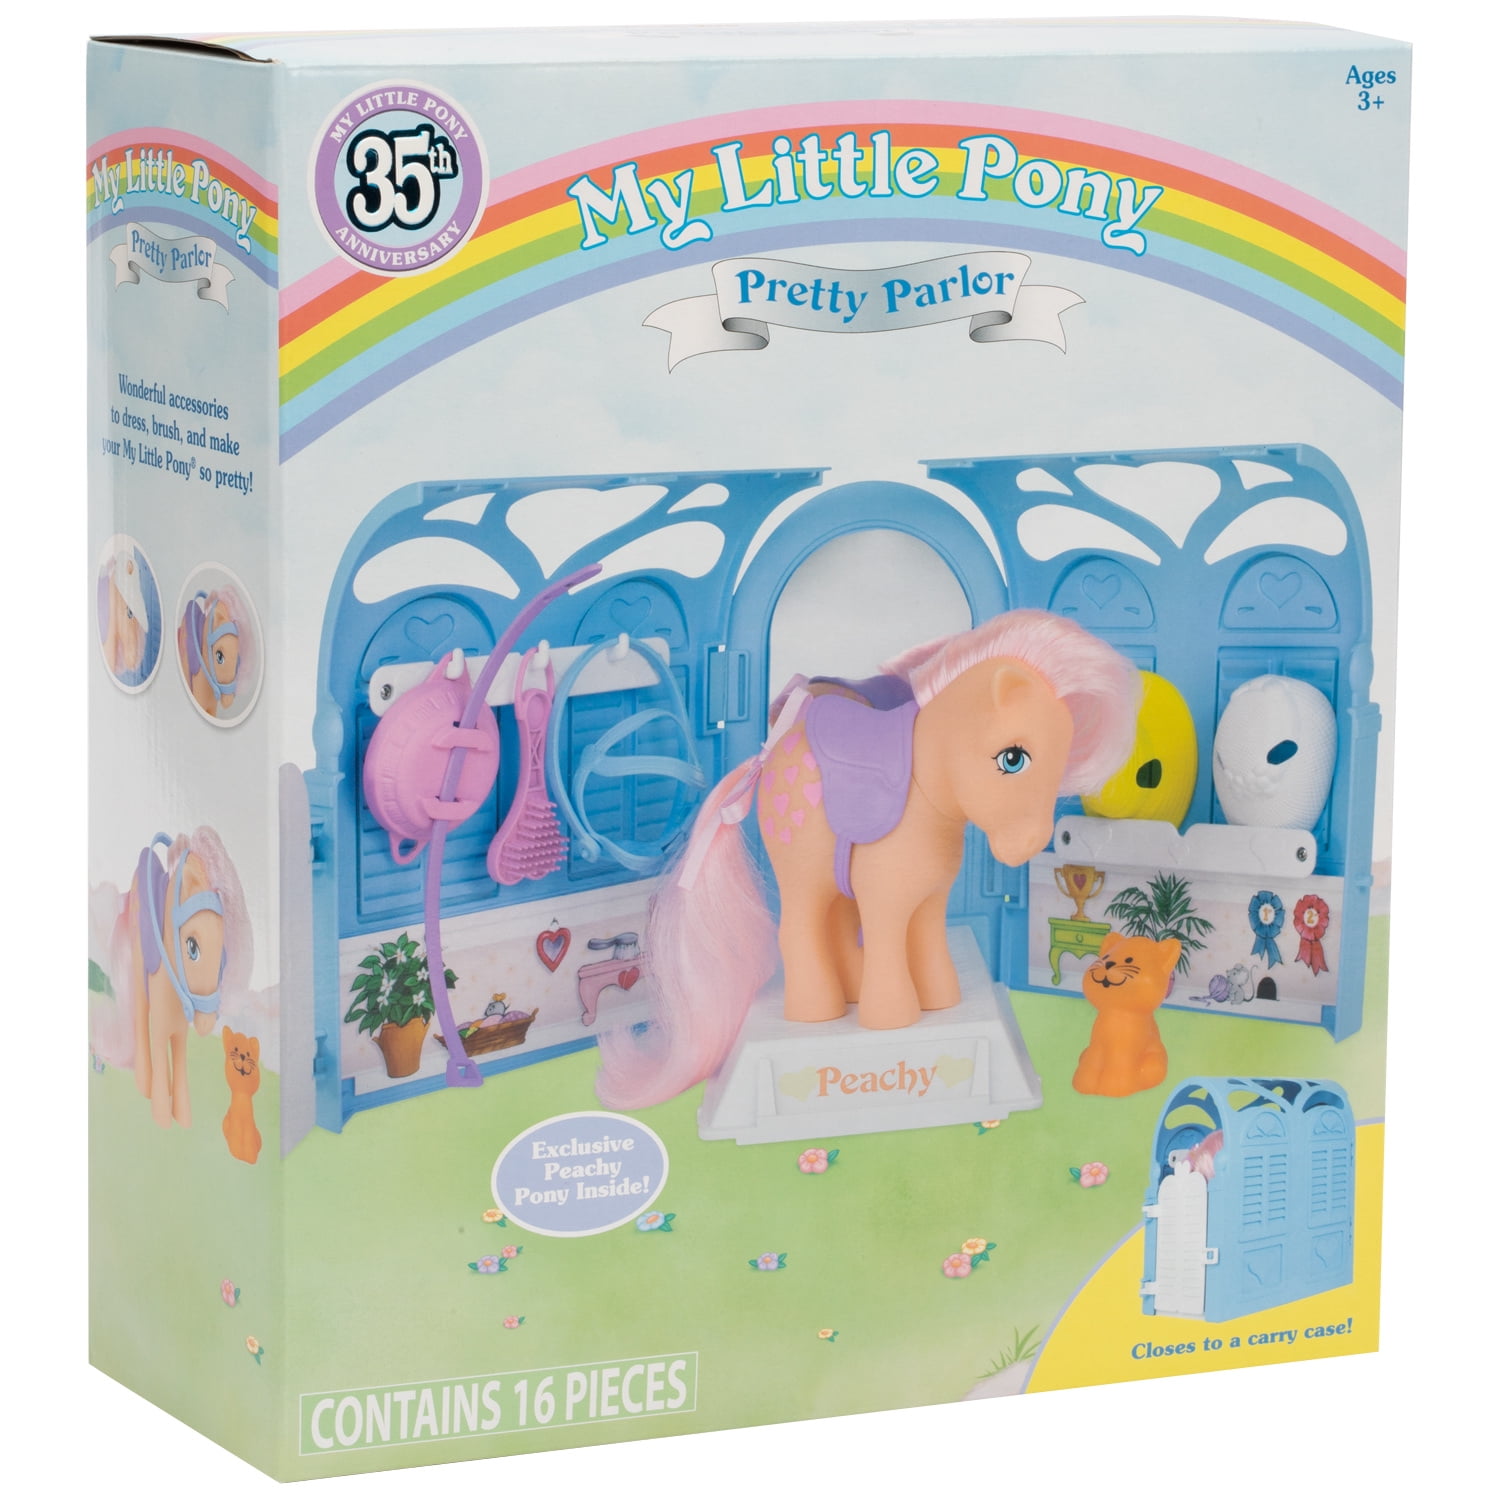 My Little Pony My Retro Pretty Parlor Playset Includes Peachy 